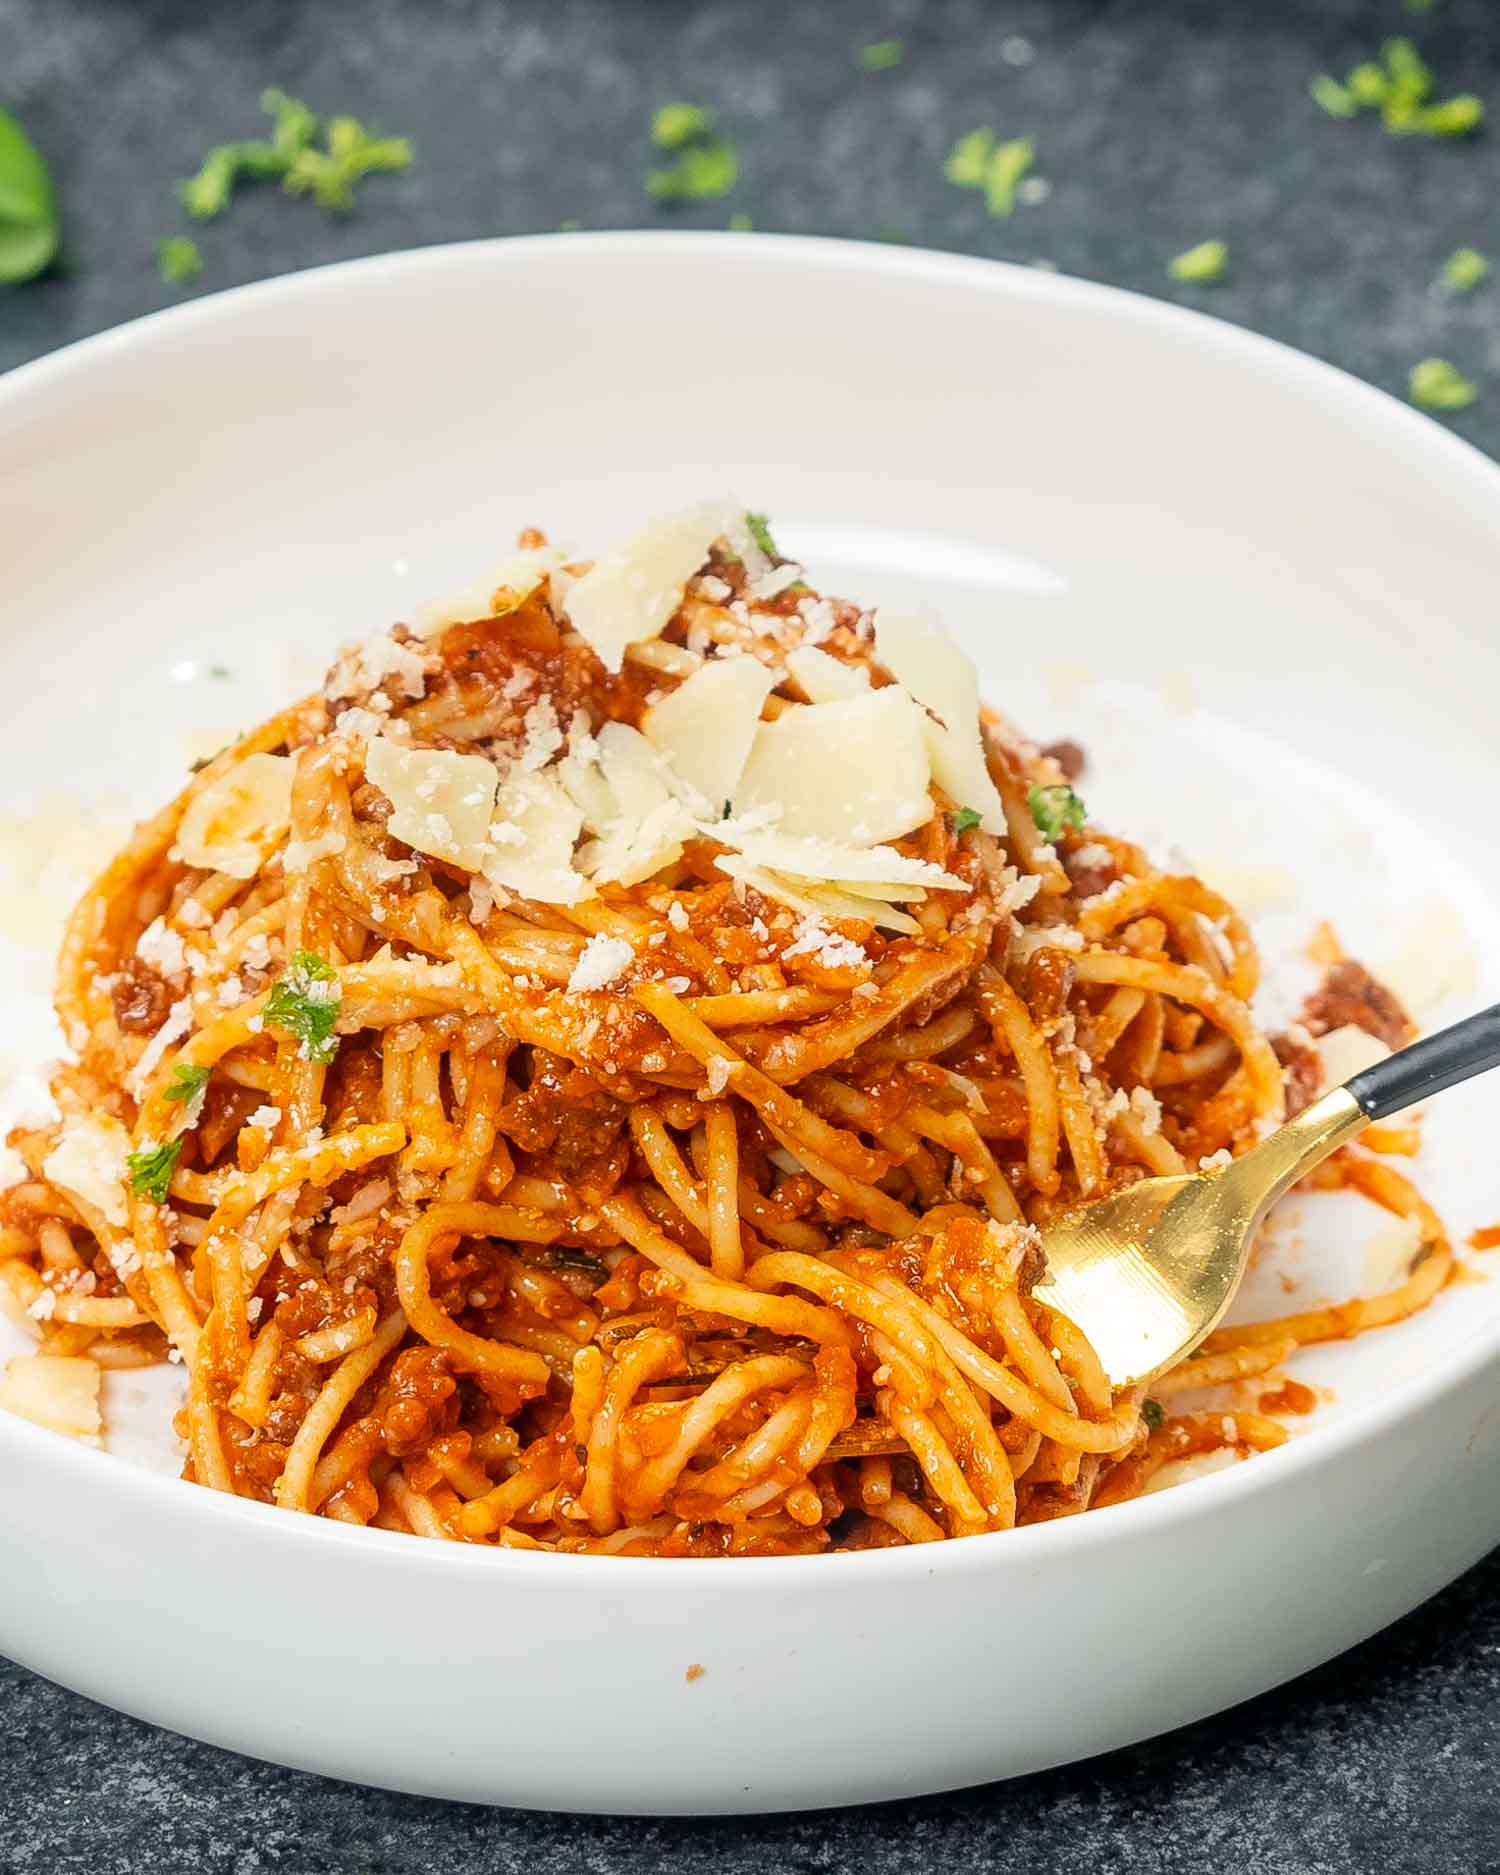 a serving of spaghetti bolognese in a white bowl garnished with parsley.